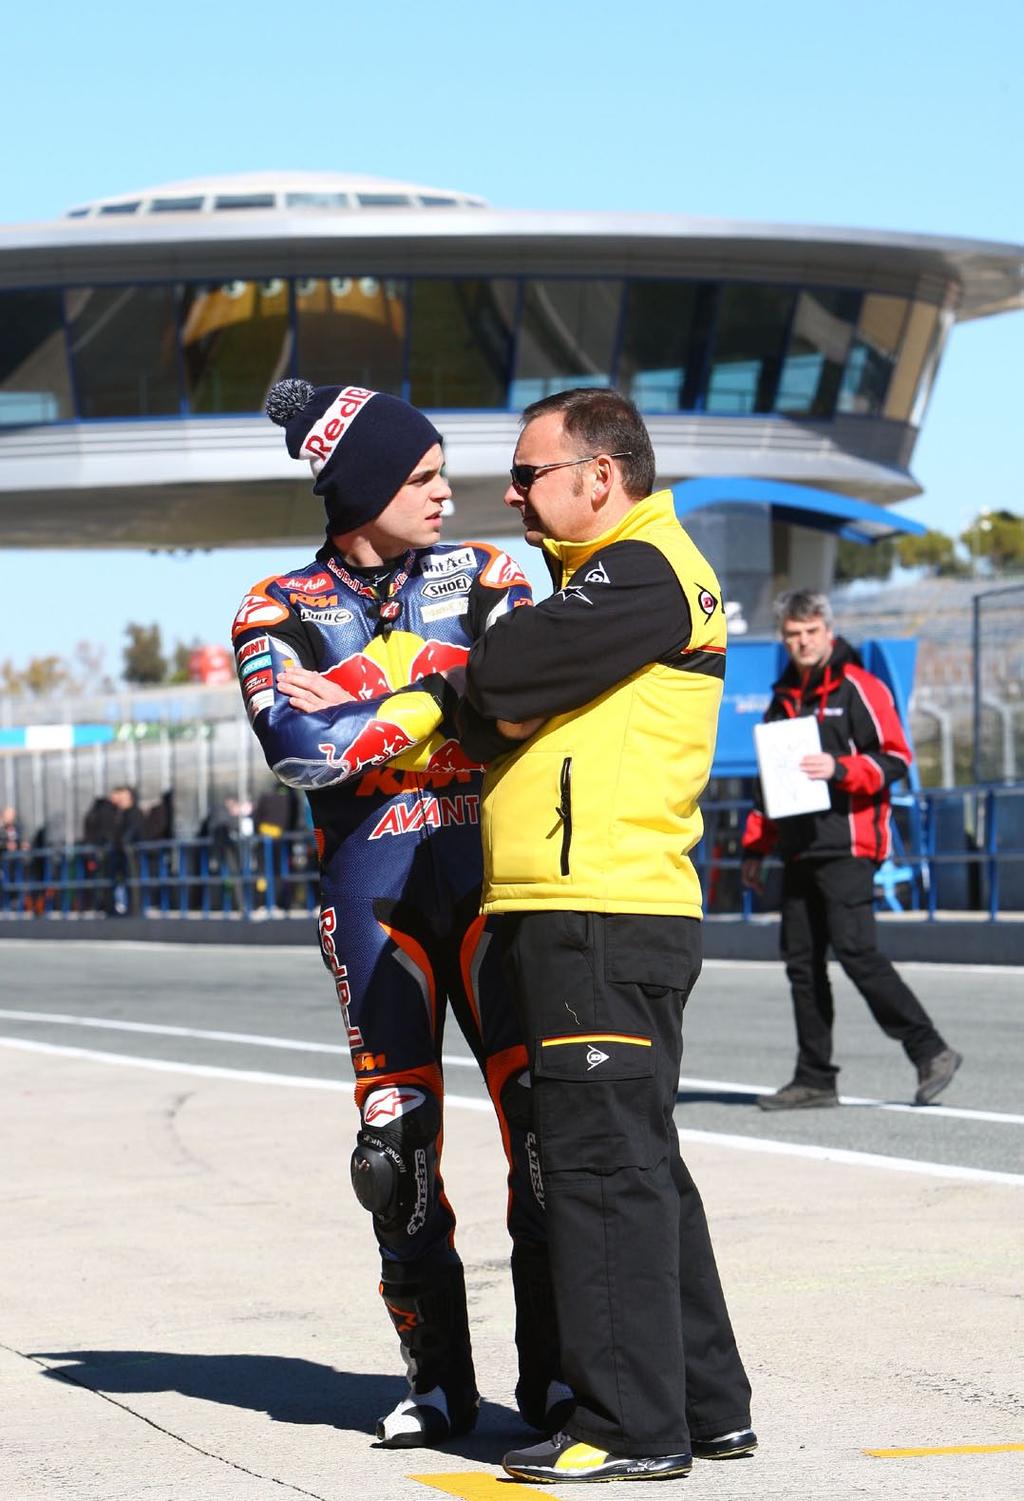 Moto3 readies for debut History will be made in Qatar on April 8, 2012 when the first ever Moto3 Grand Prix is held at the season-opening round of the MotoGP World Championships.